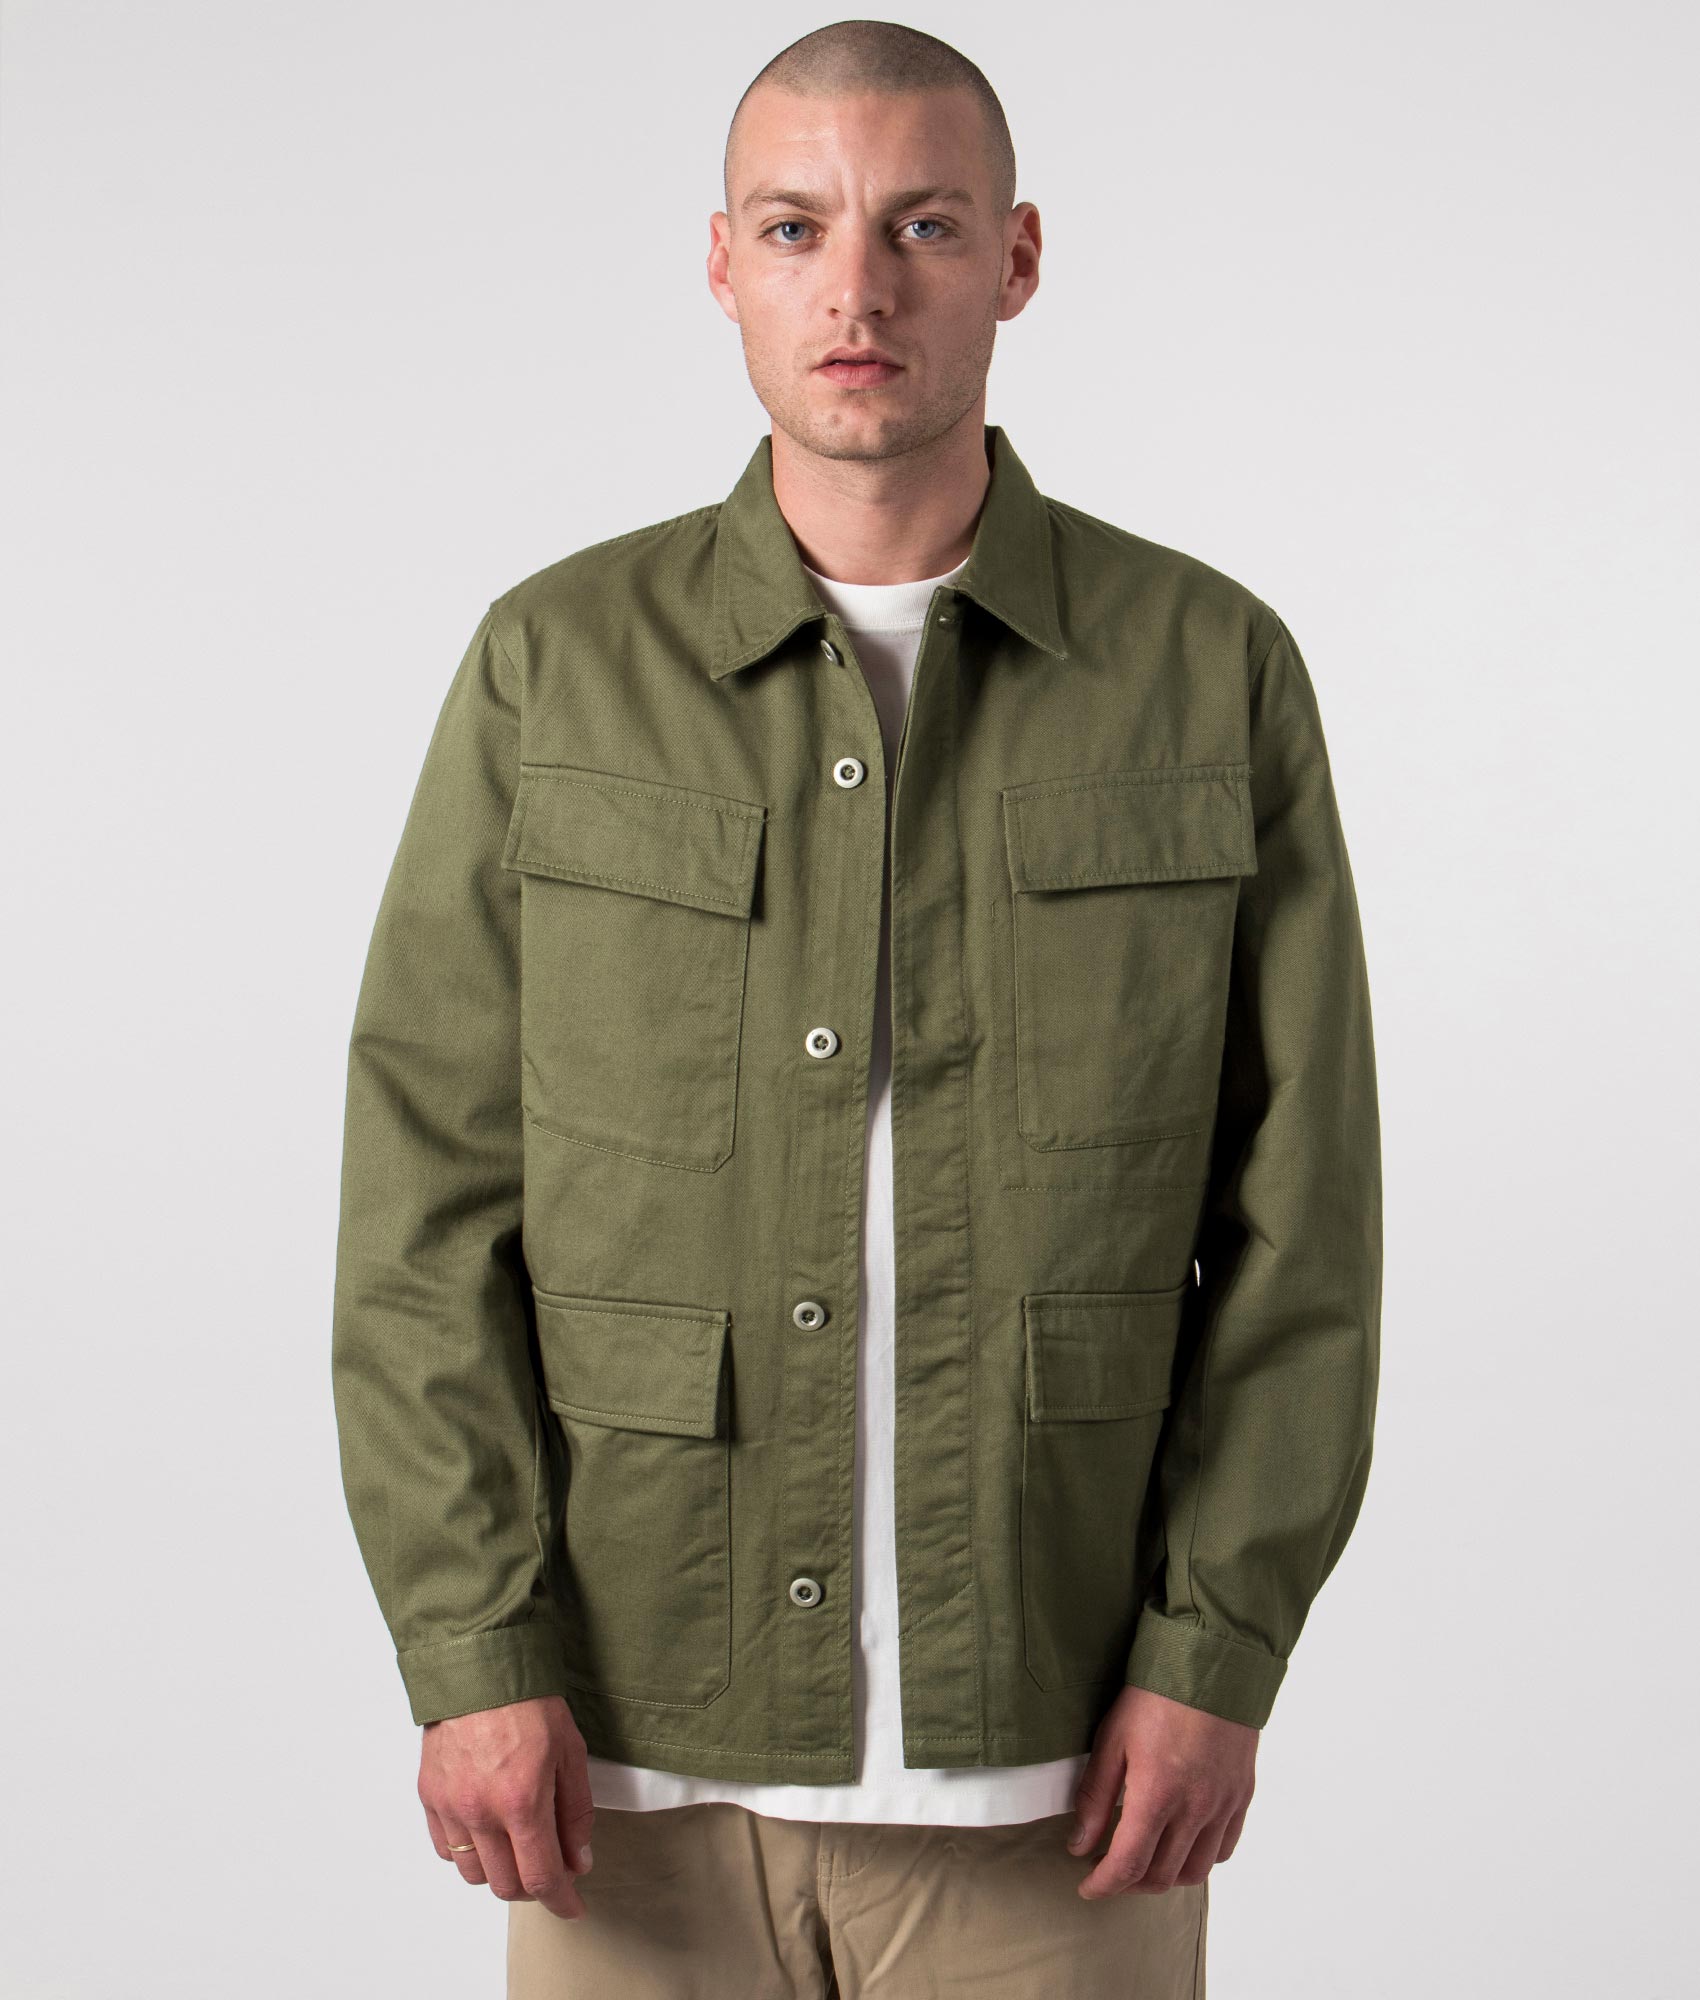 Relaxed Fit MW Fatigue Jacket Light Olive | Universal Works | EQVVS